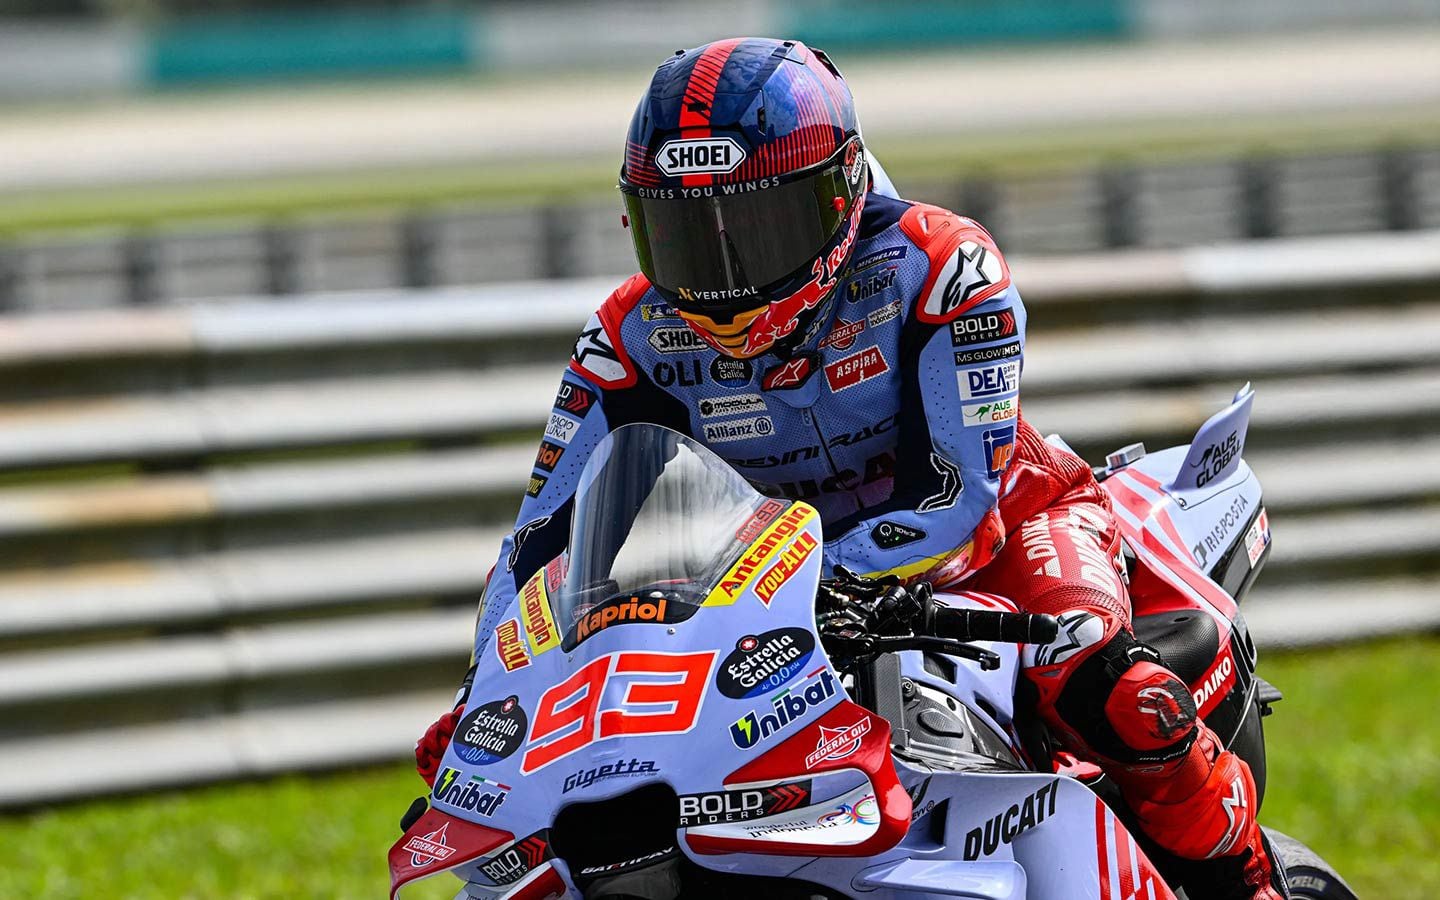 Can Márquez earn another MotoGP championship? If so, it may be the biggest of his career.